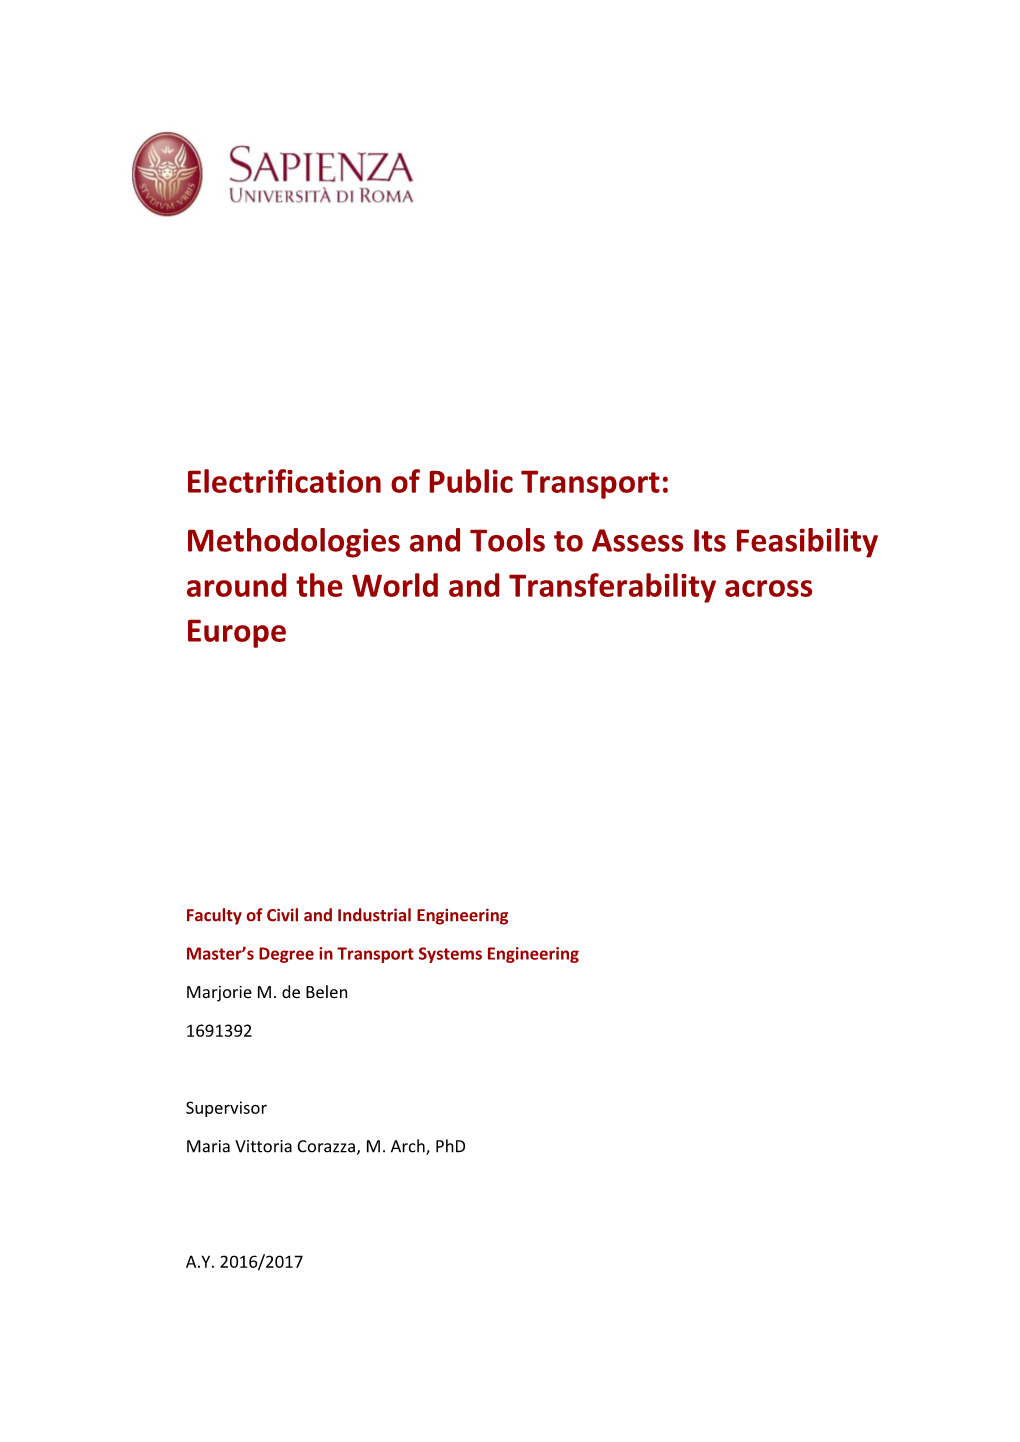 Electrification of Public Transport: Methodologies and Tools to Assess Its Feasibility Around the World and Transferability Across Europe